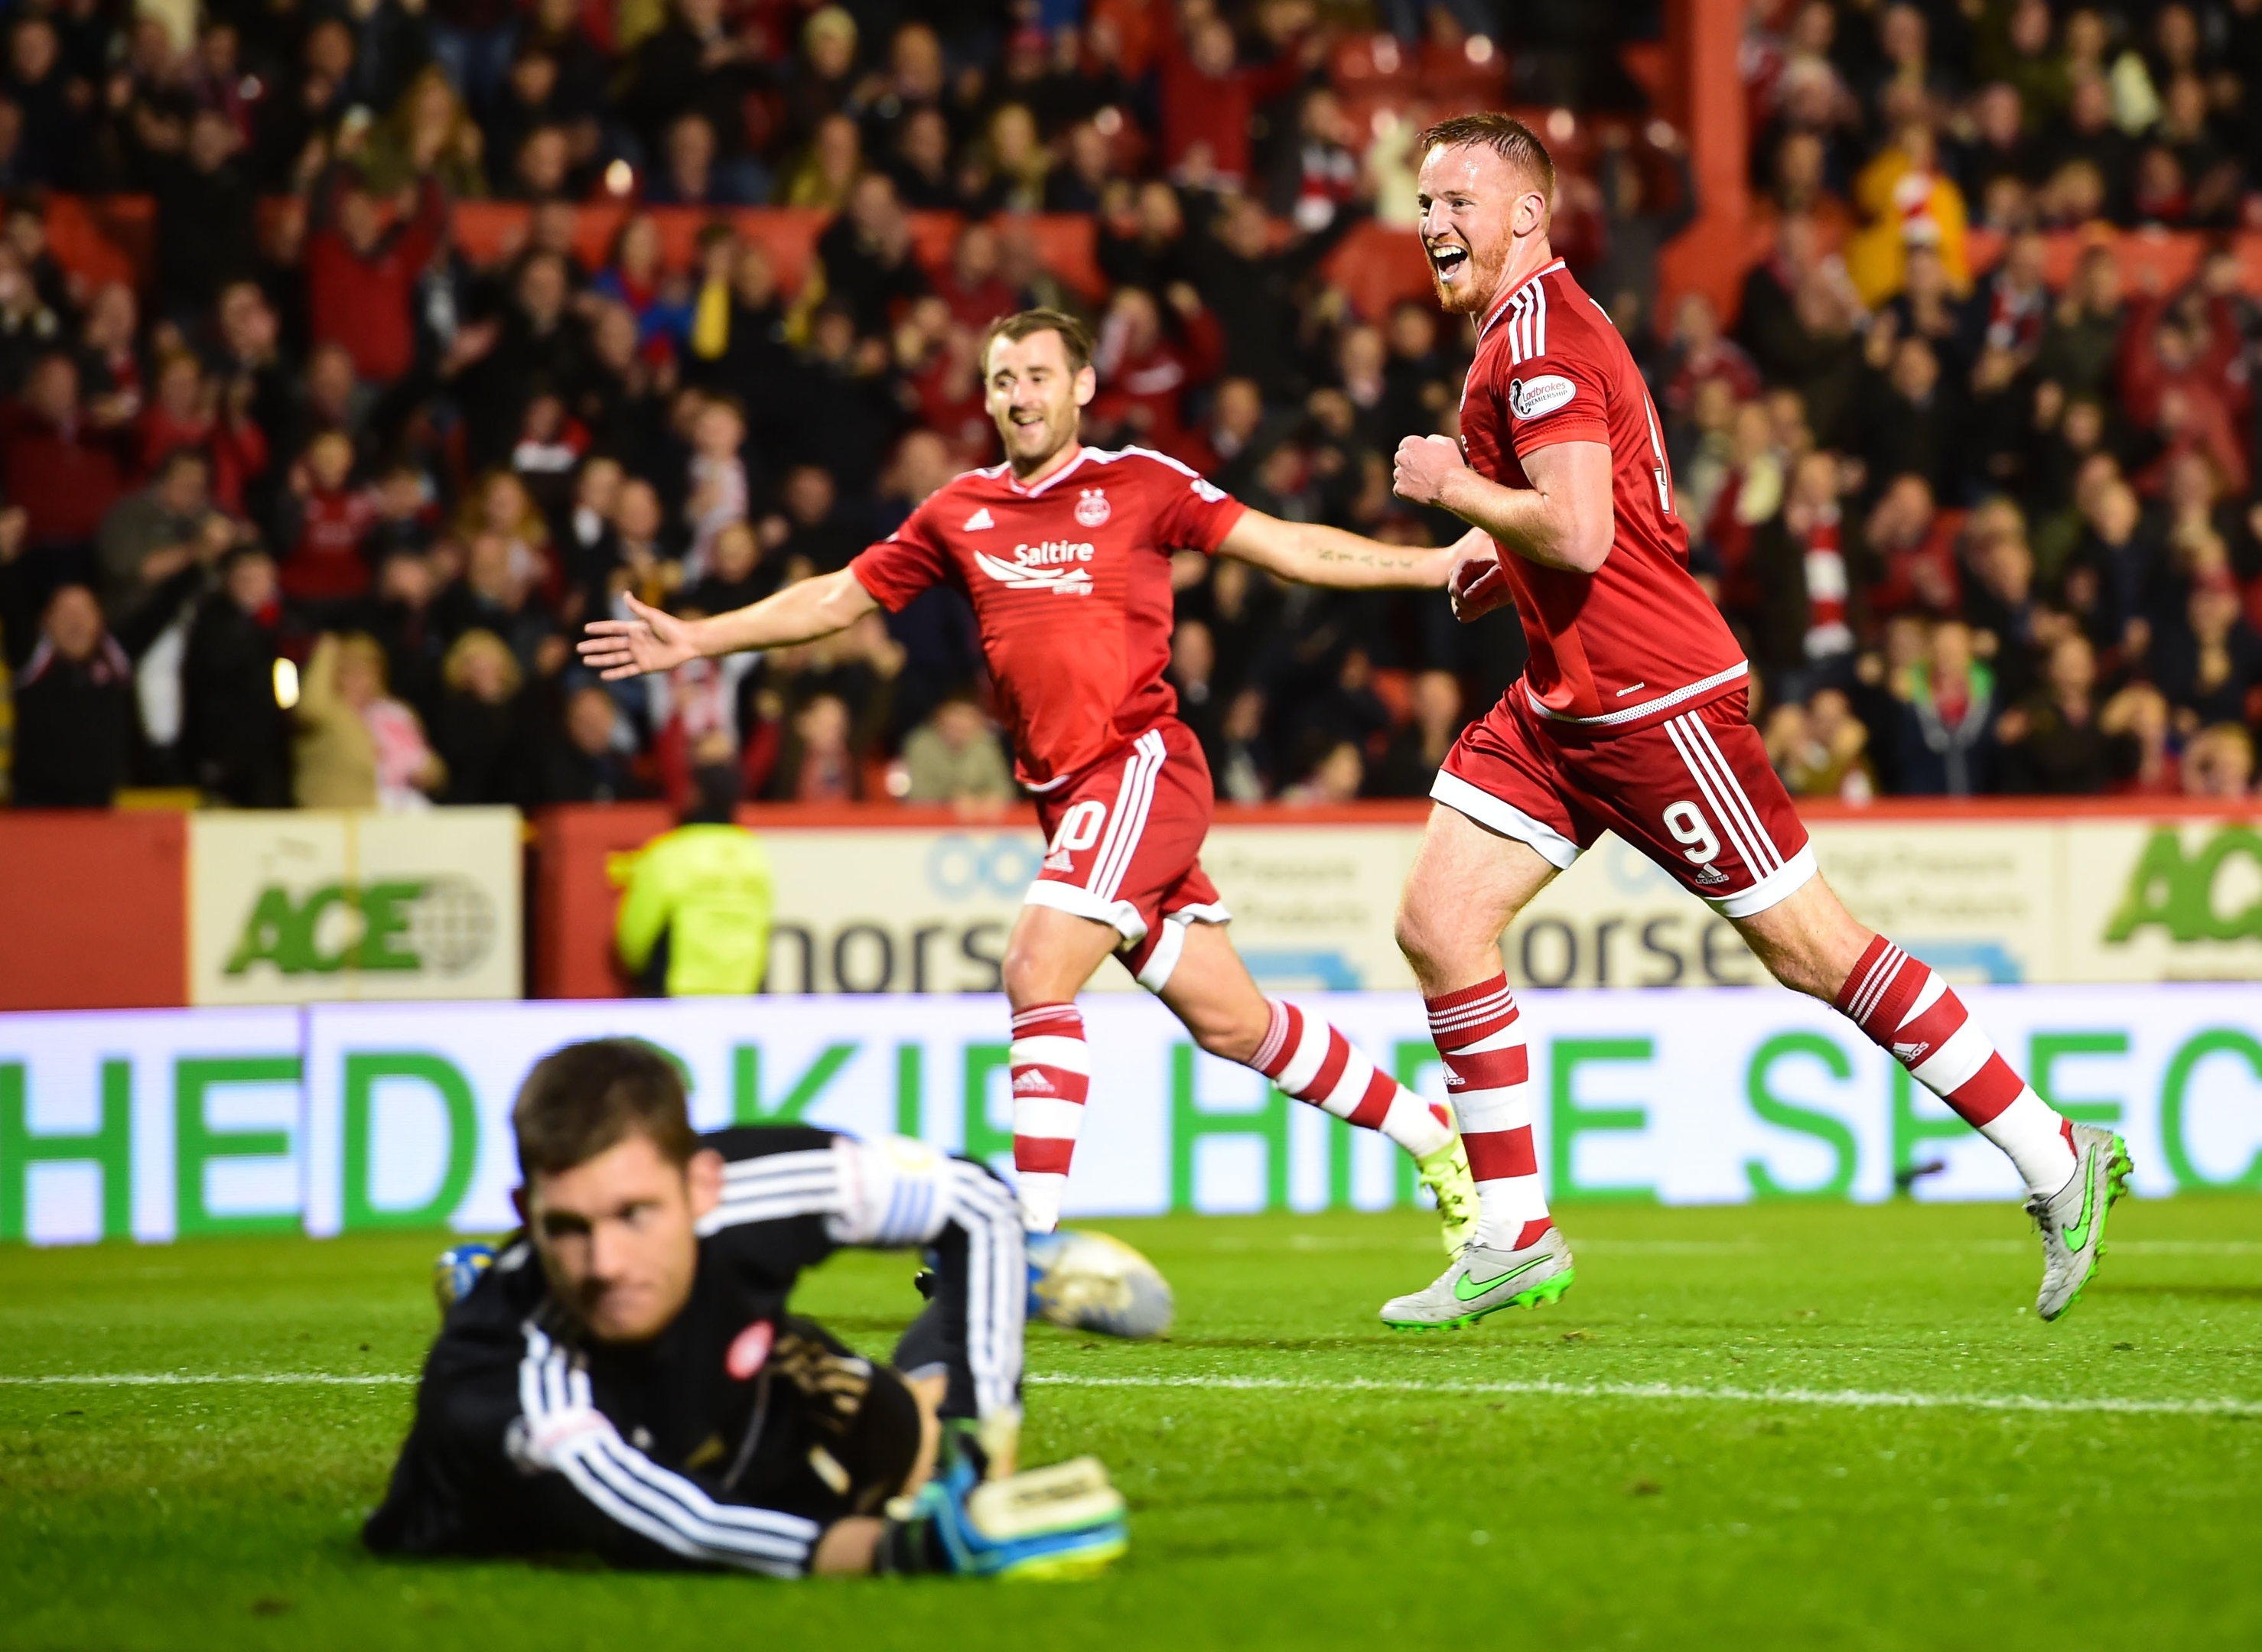 Adam Rooney celebrates having fired home from the penalty spot to put his side ahead